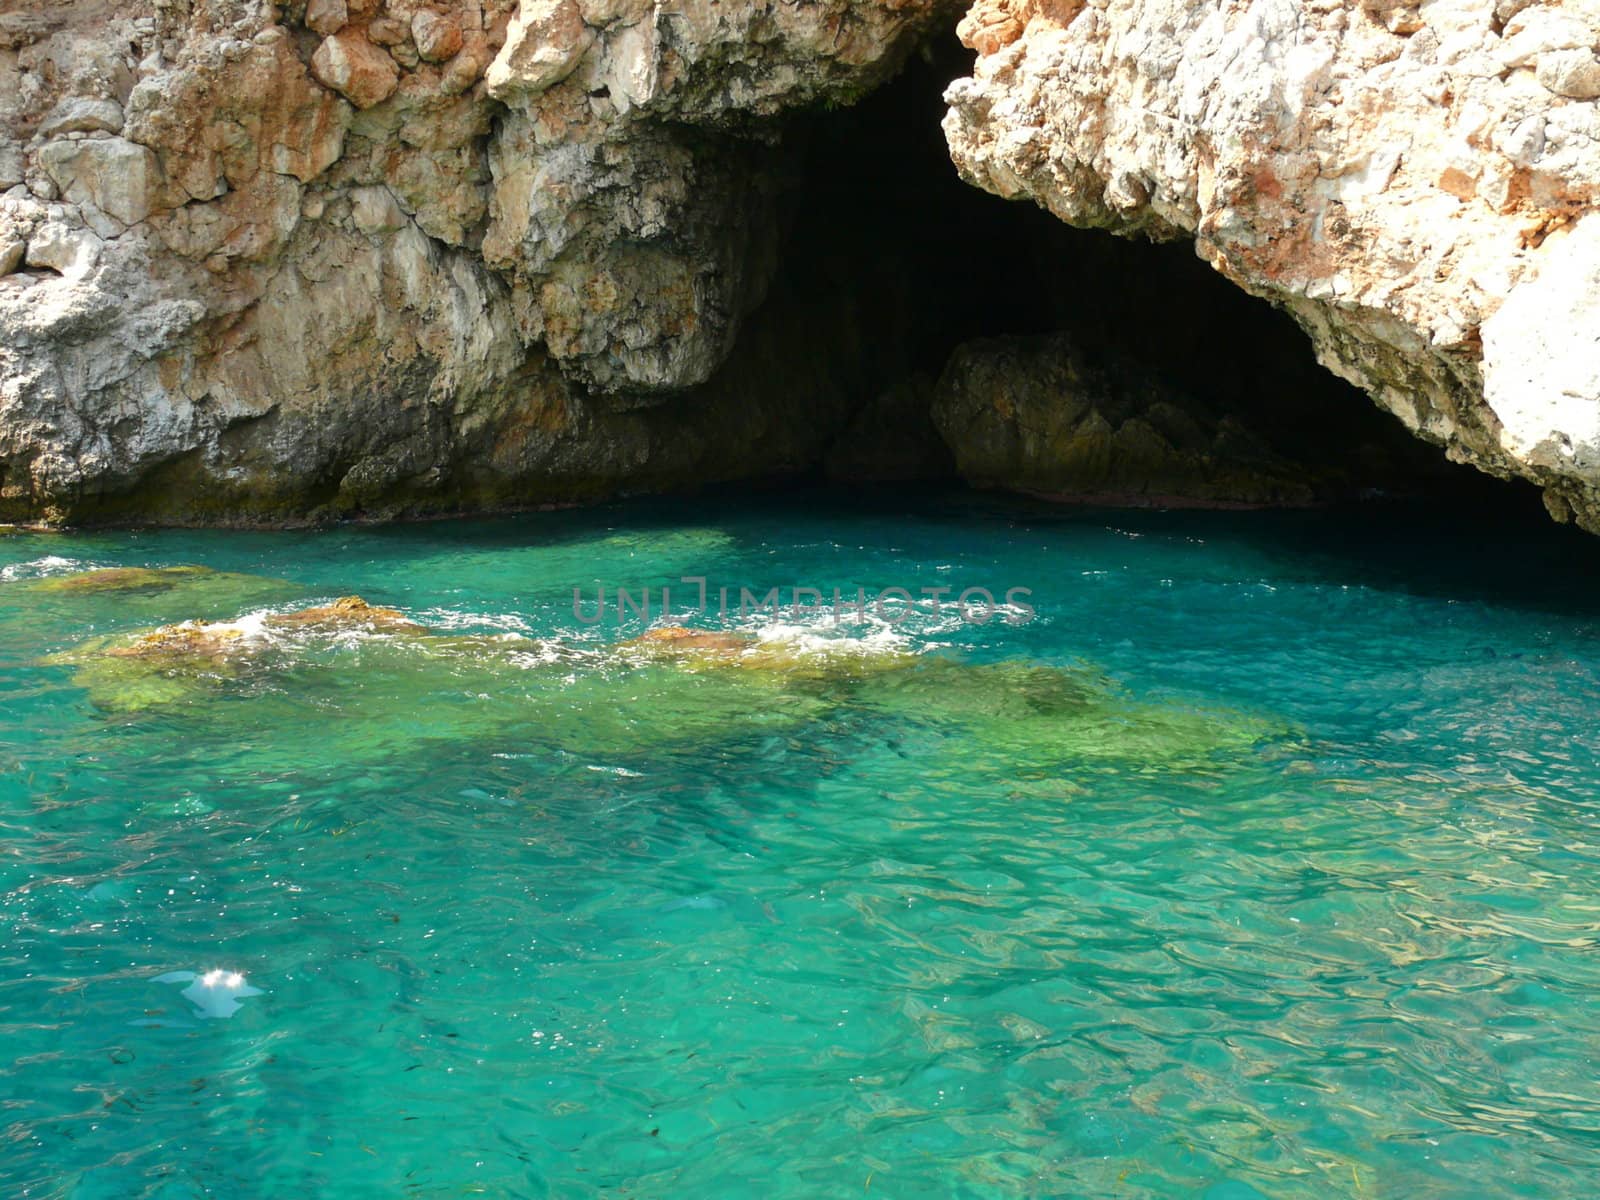 Cave under the water - Alania, turkey